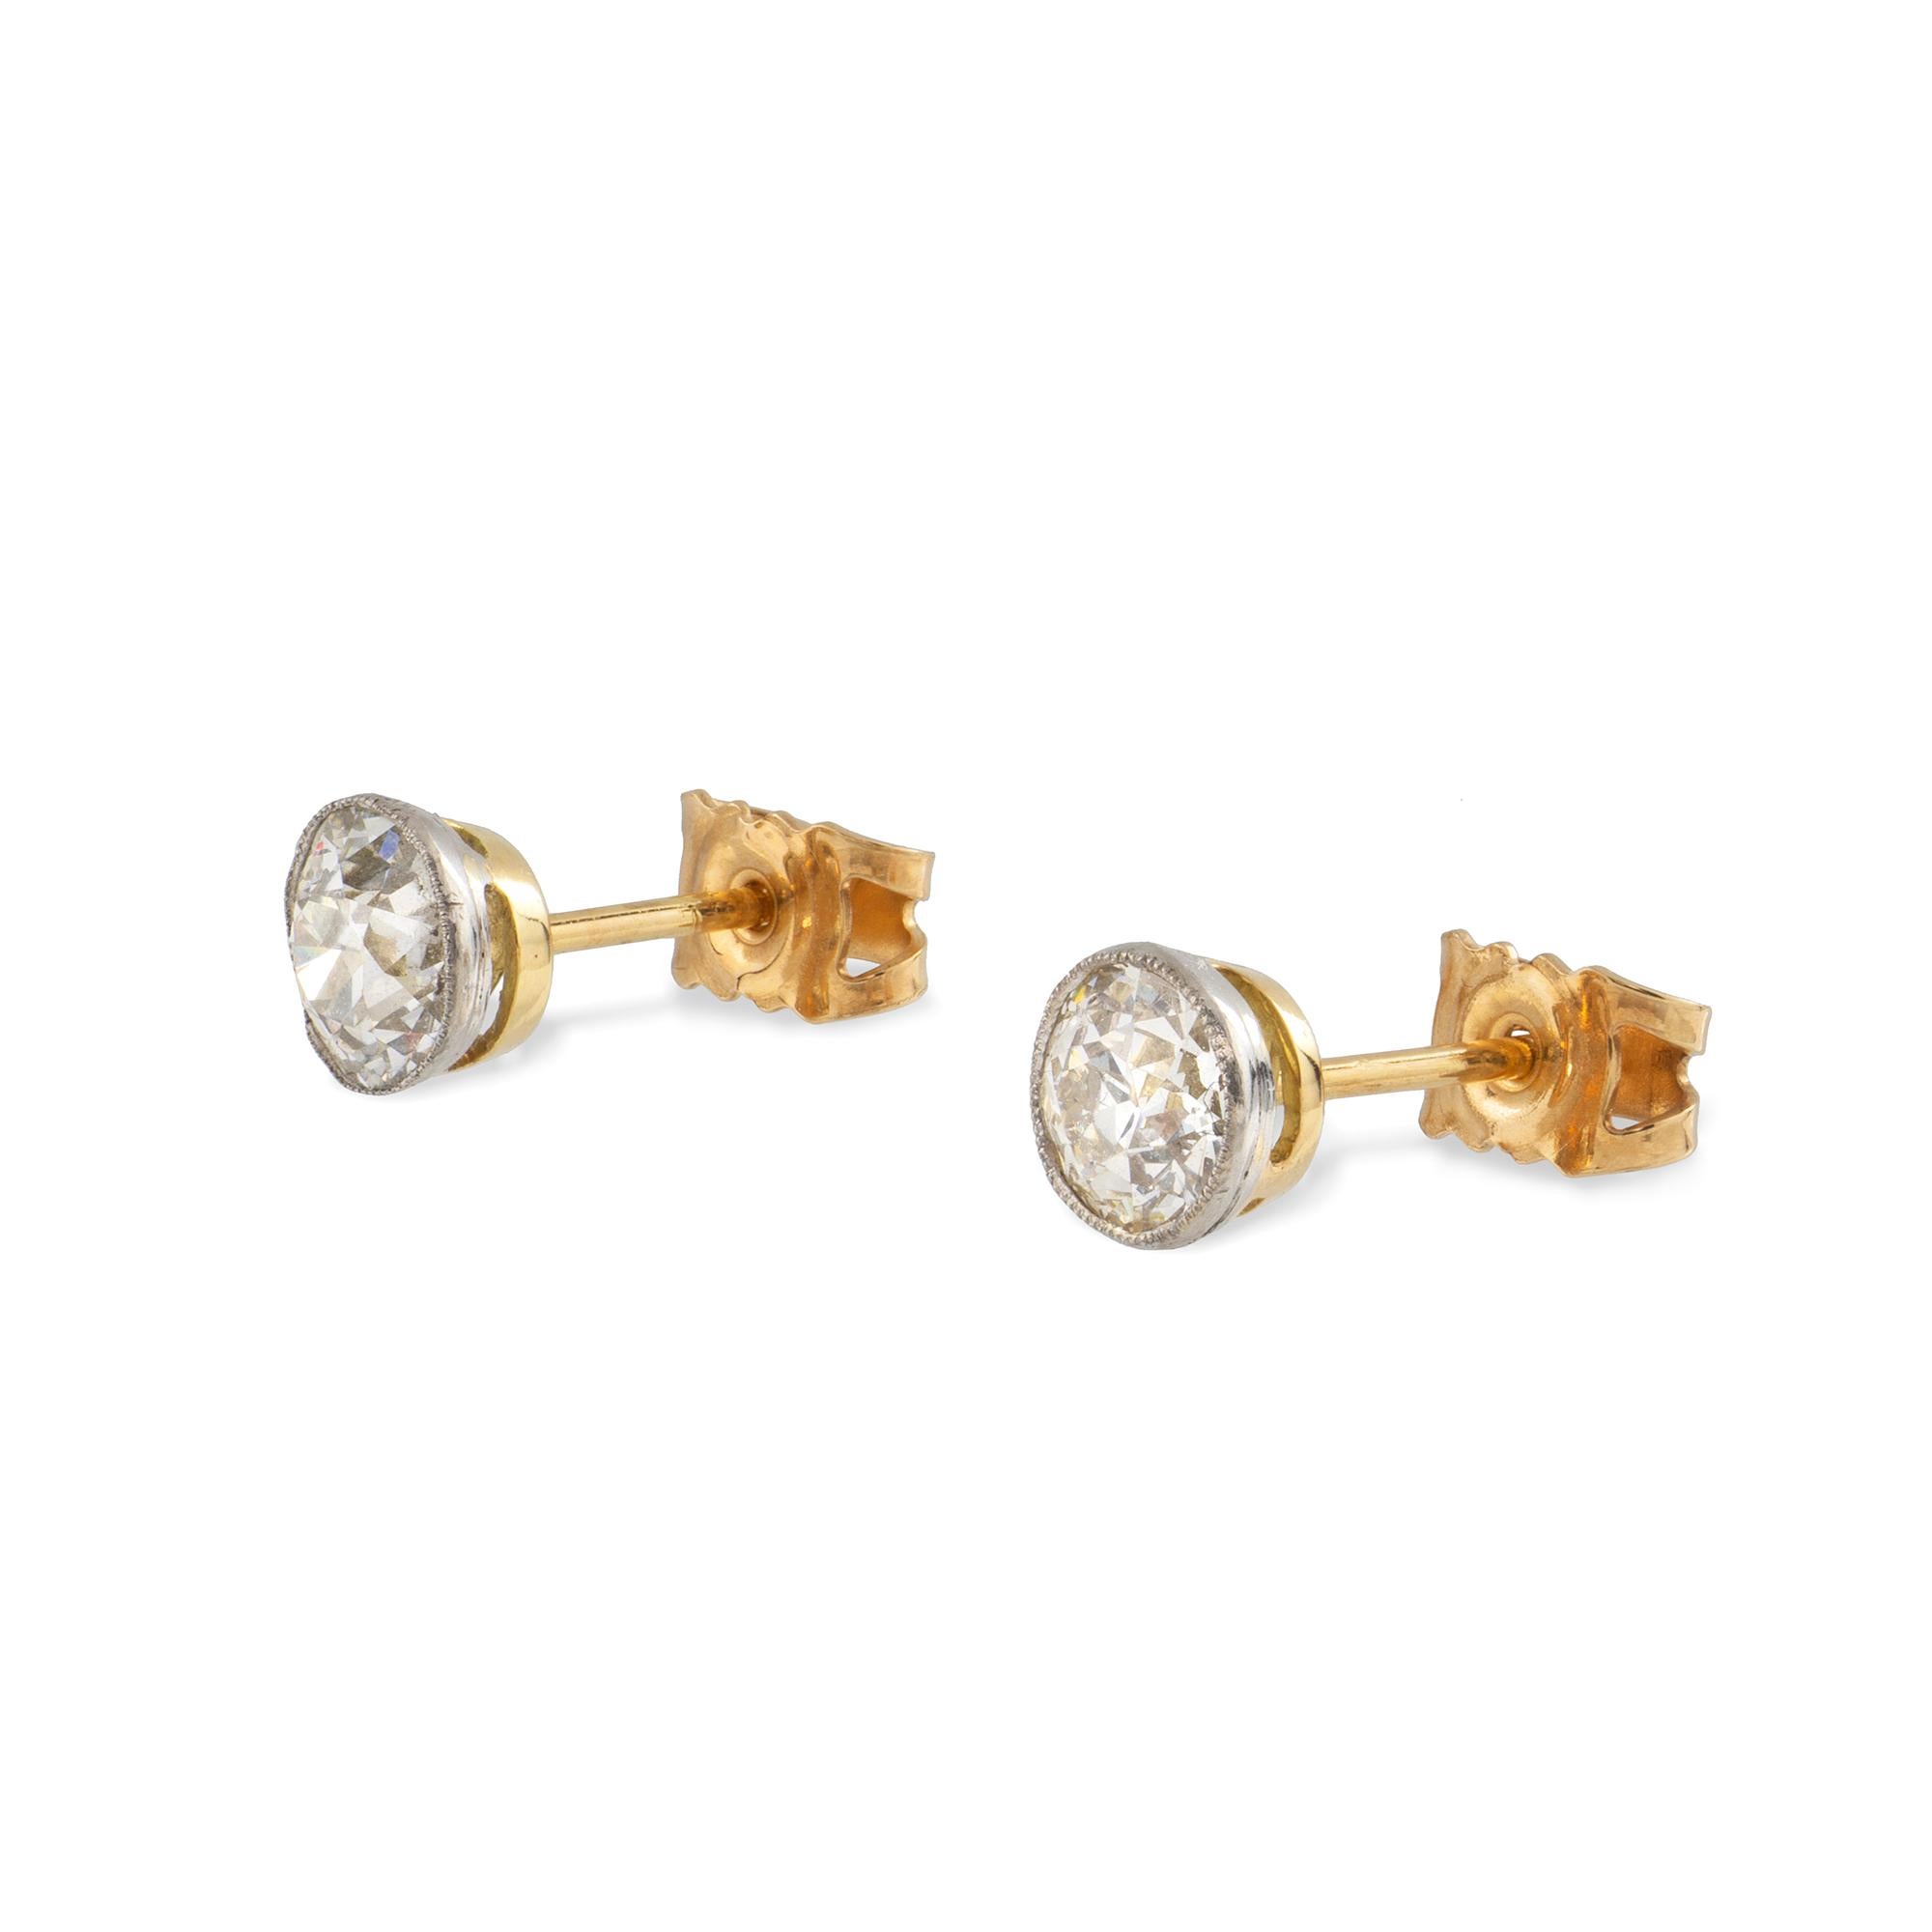 A pair of single stone diamond stud earrings, the round old cut diamonds with estimated combined weight 1.70 carats, each rub-over millegrain-set in platinum with gold back, circa 1930, with later gold peg and C-scroll fitting, measuring